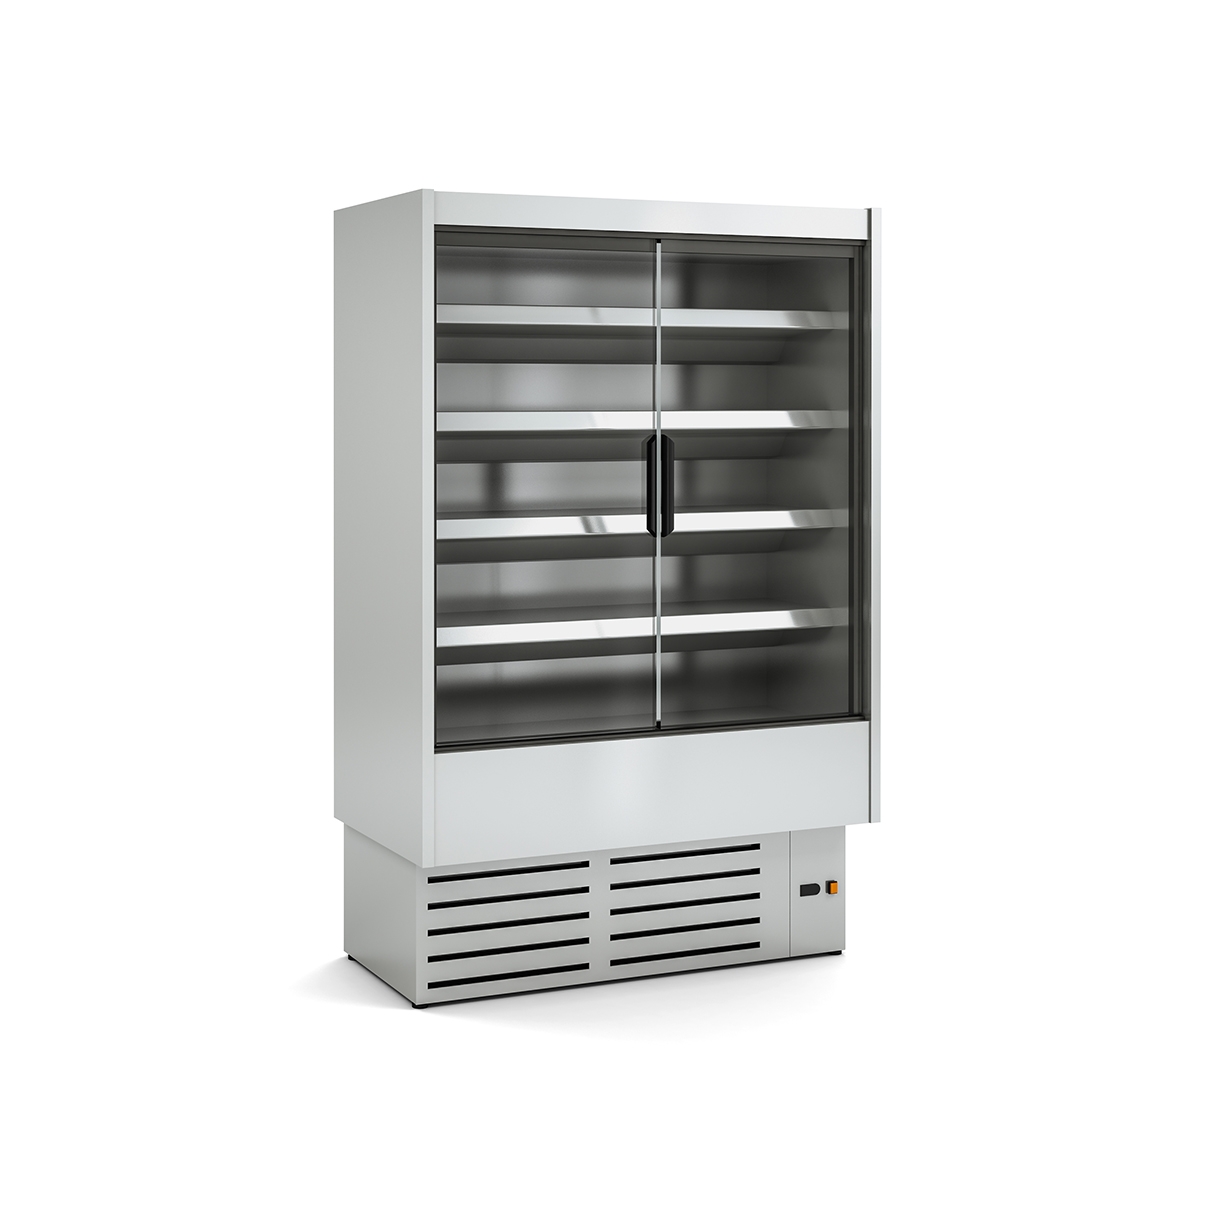 REFRIGERATED WALL-MOUNTED DISPLAY CABINET DG1 I M1-M2